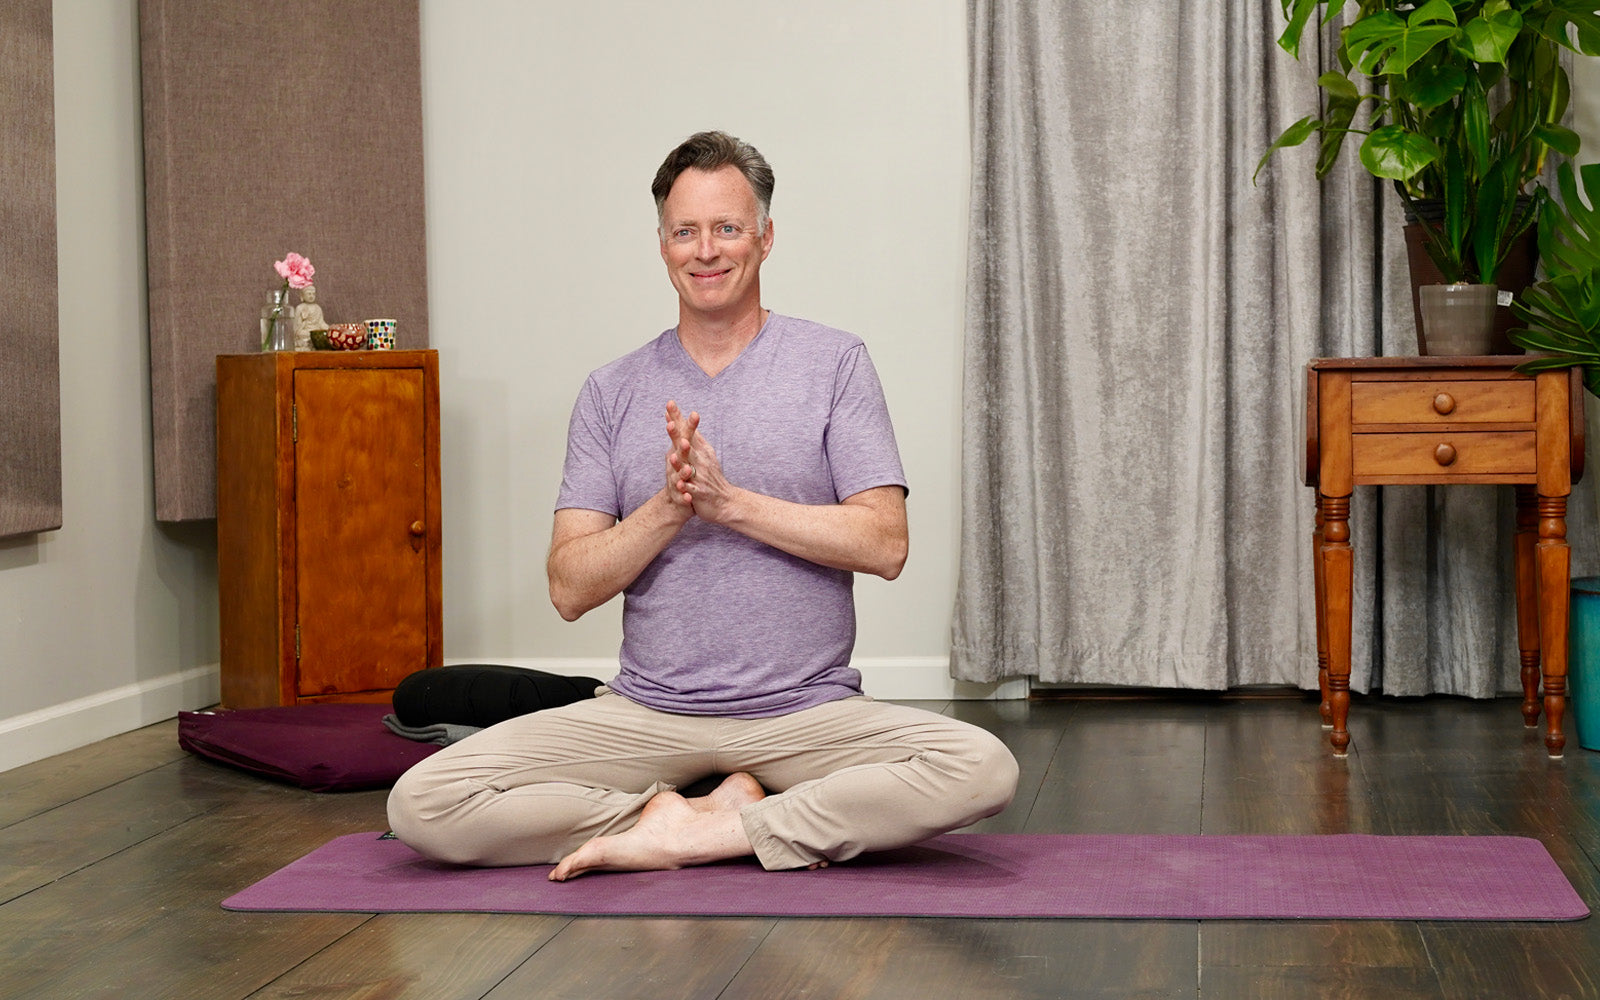 Yoga for Tall Guys - Tips From a (Tall) Professional Yoga Instructor